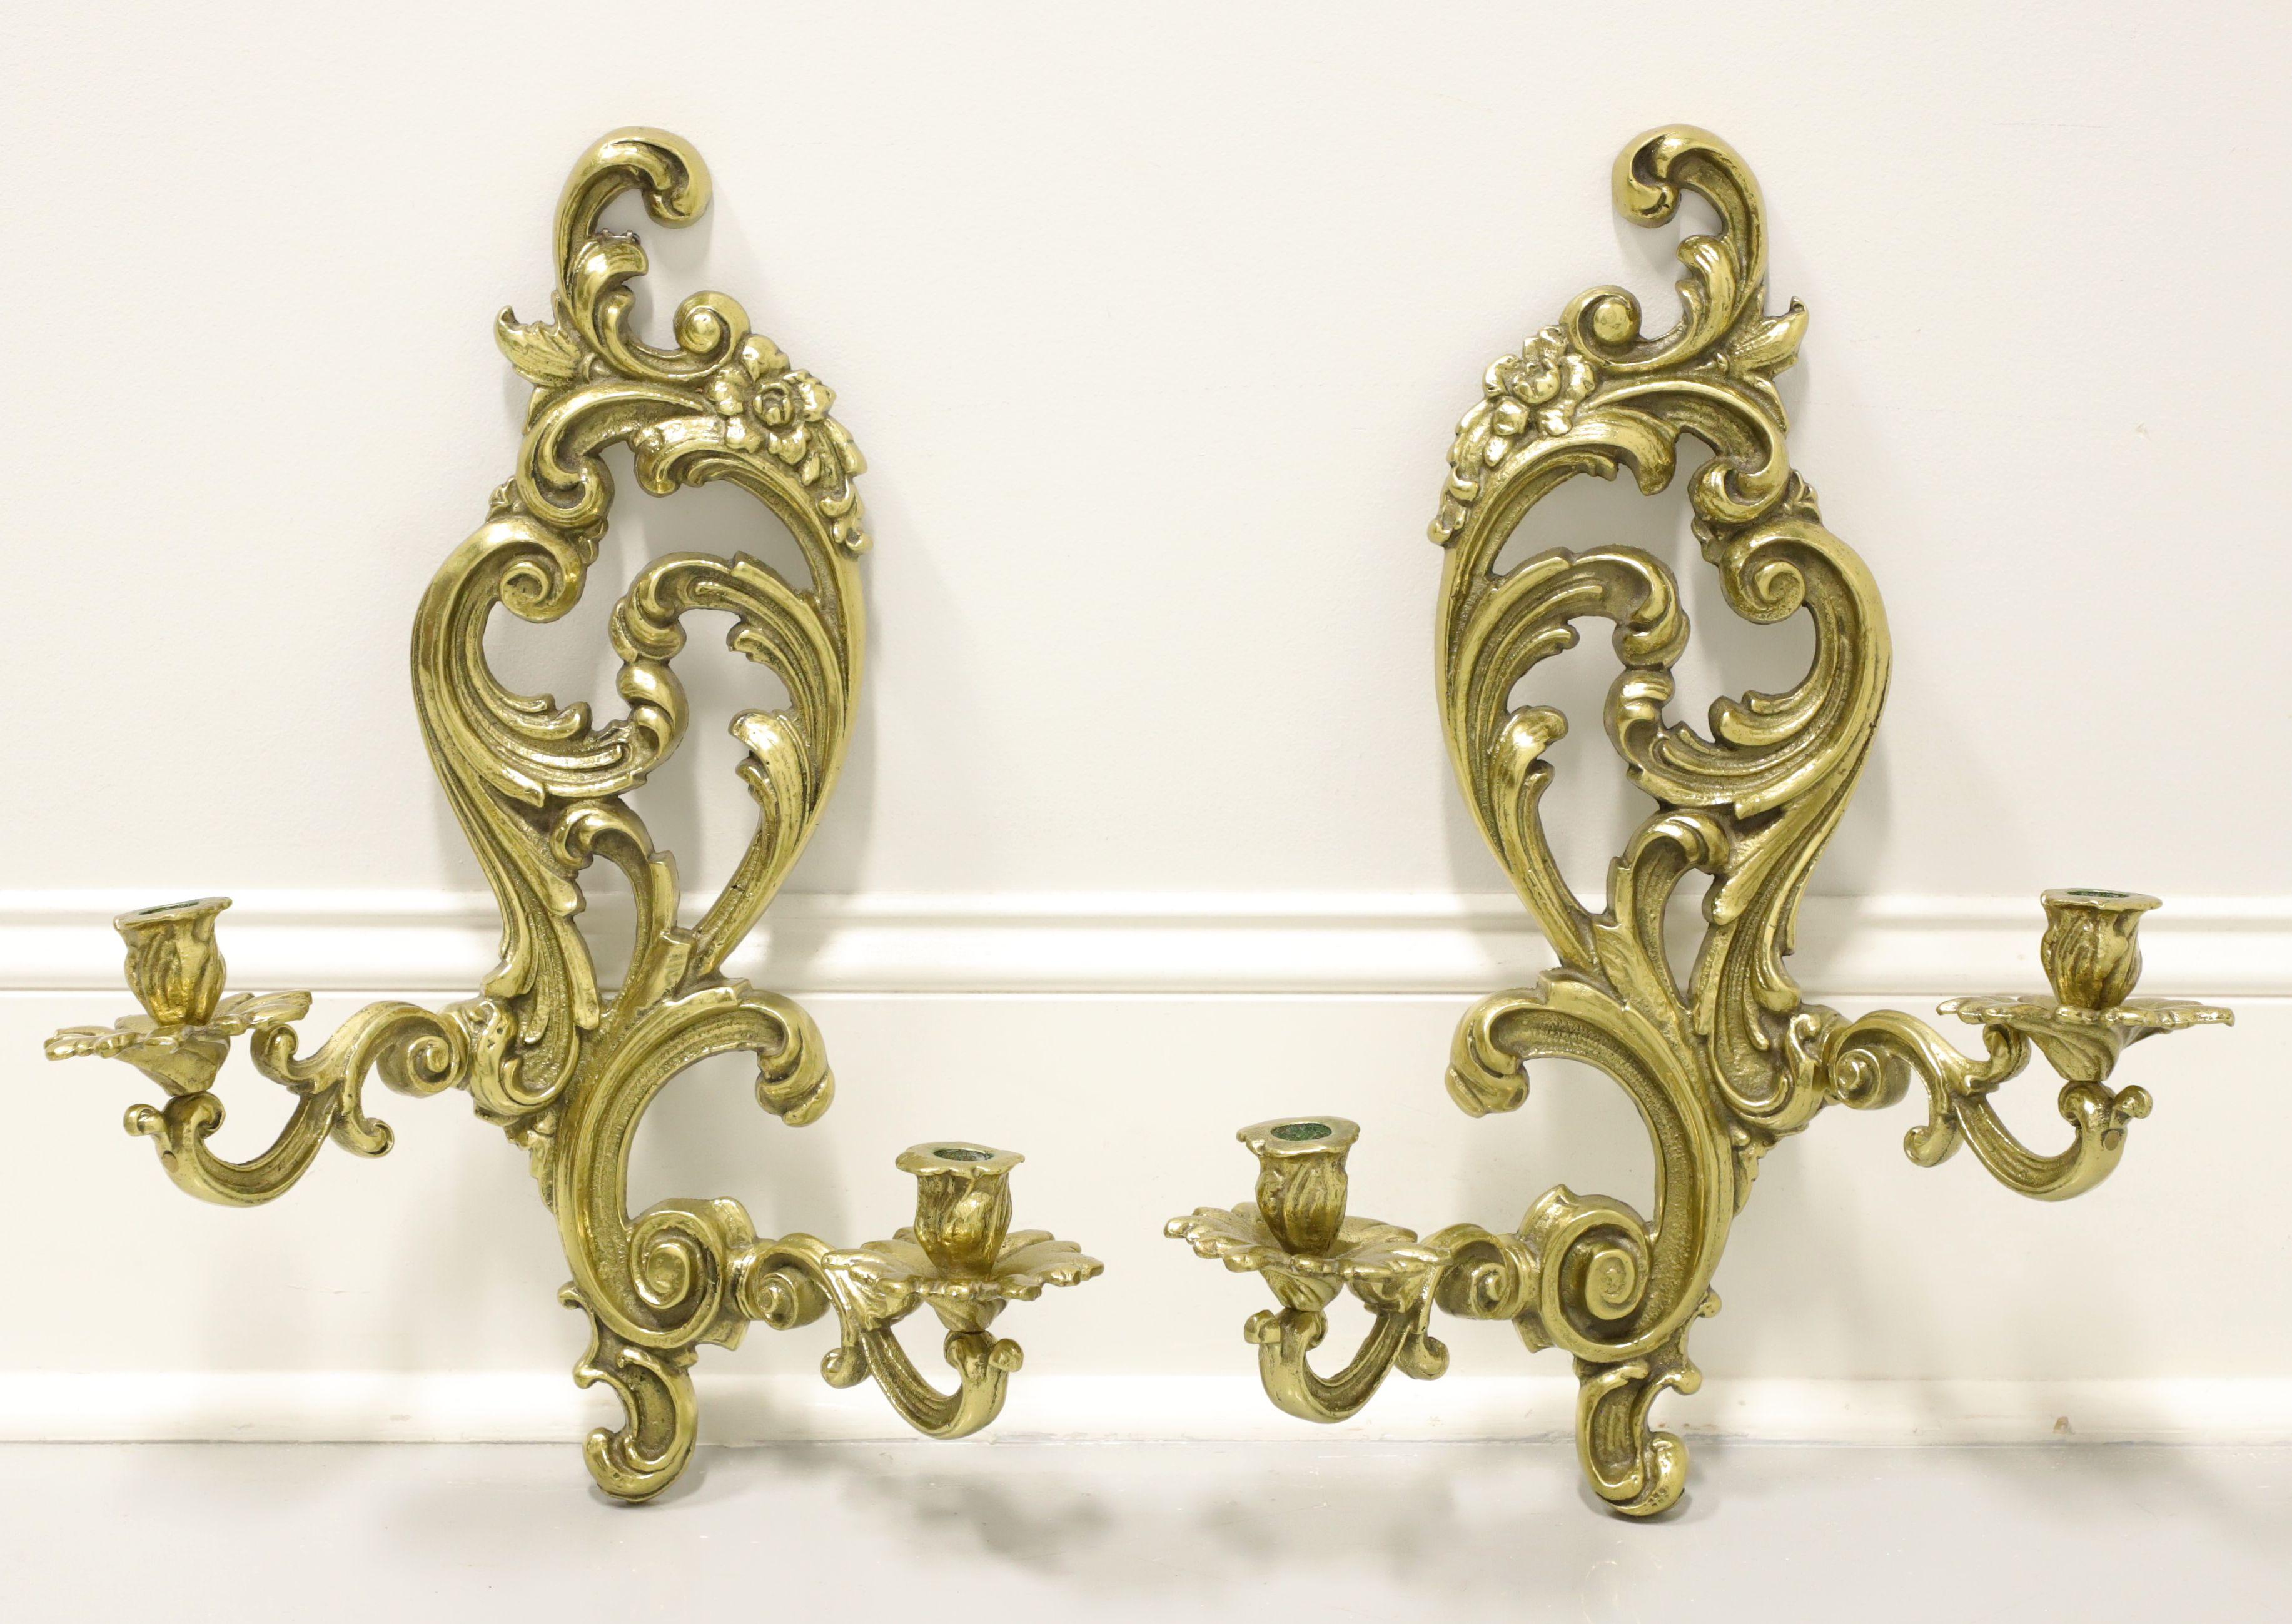 Antique 1920's Solid Brass Rococo Style Candle Wall Sconces - Pair For Sale 5